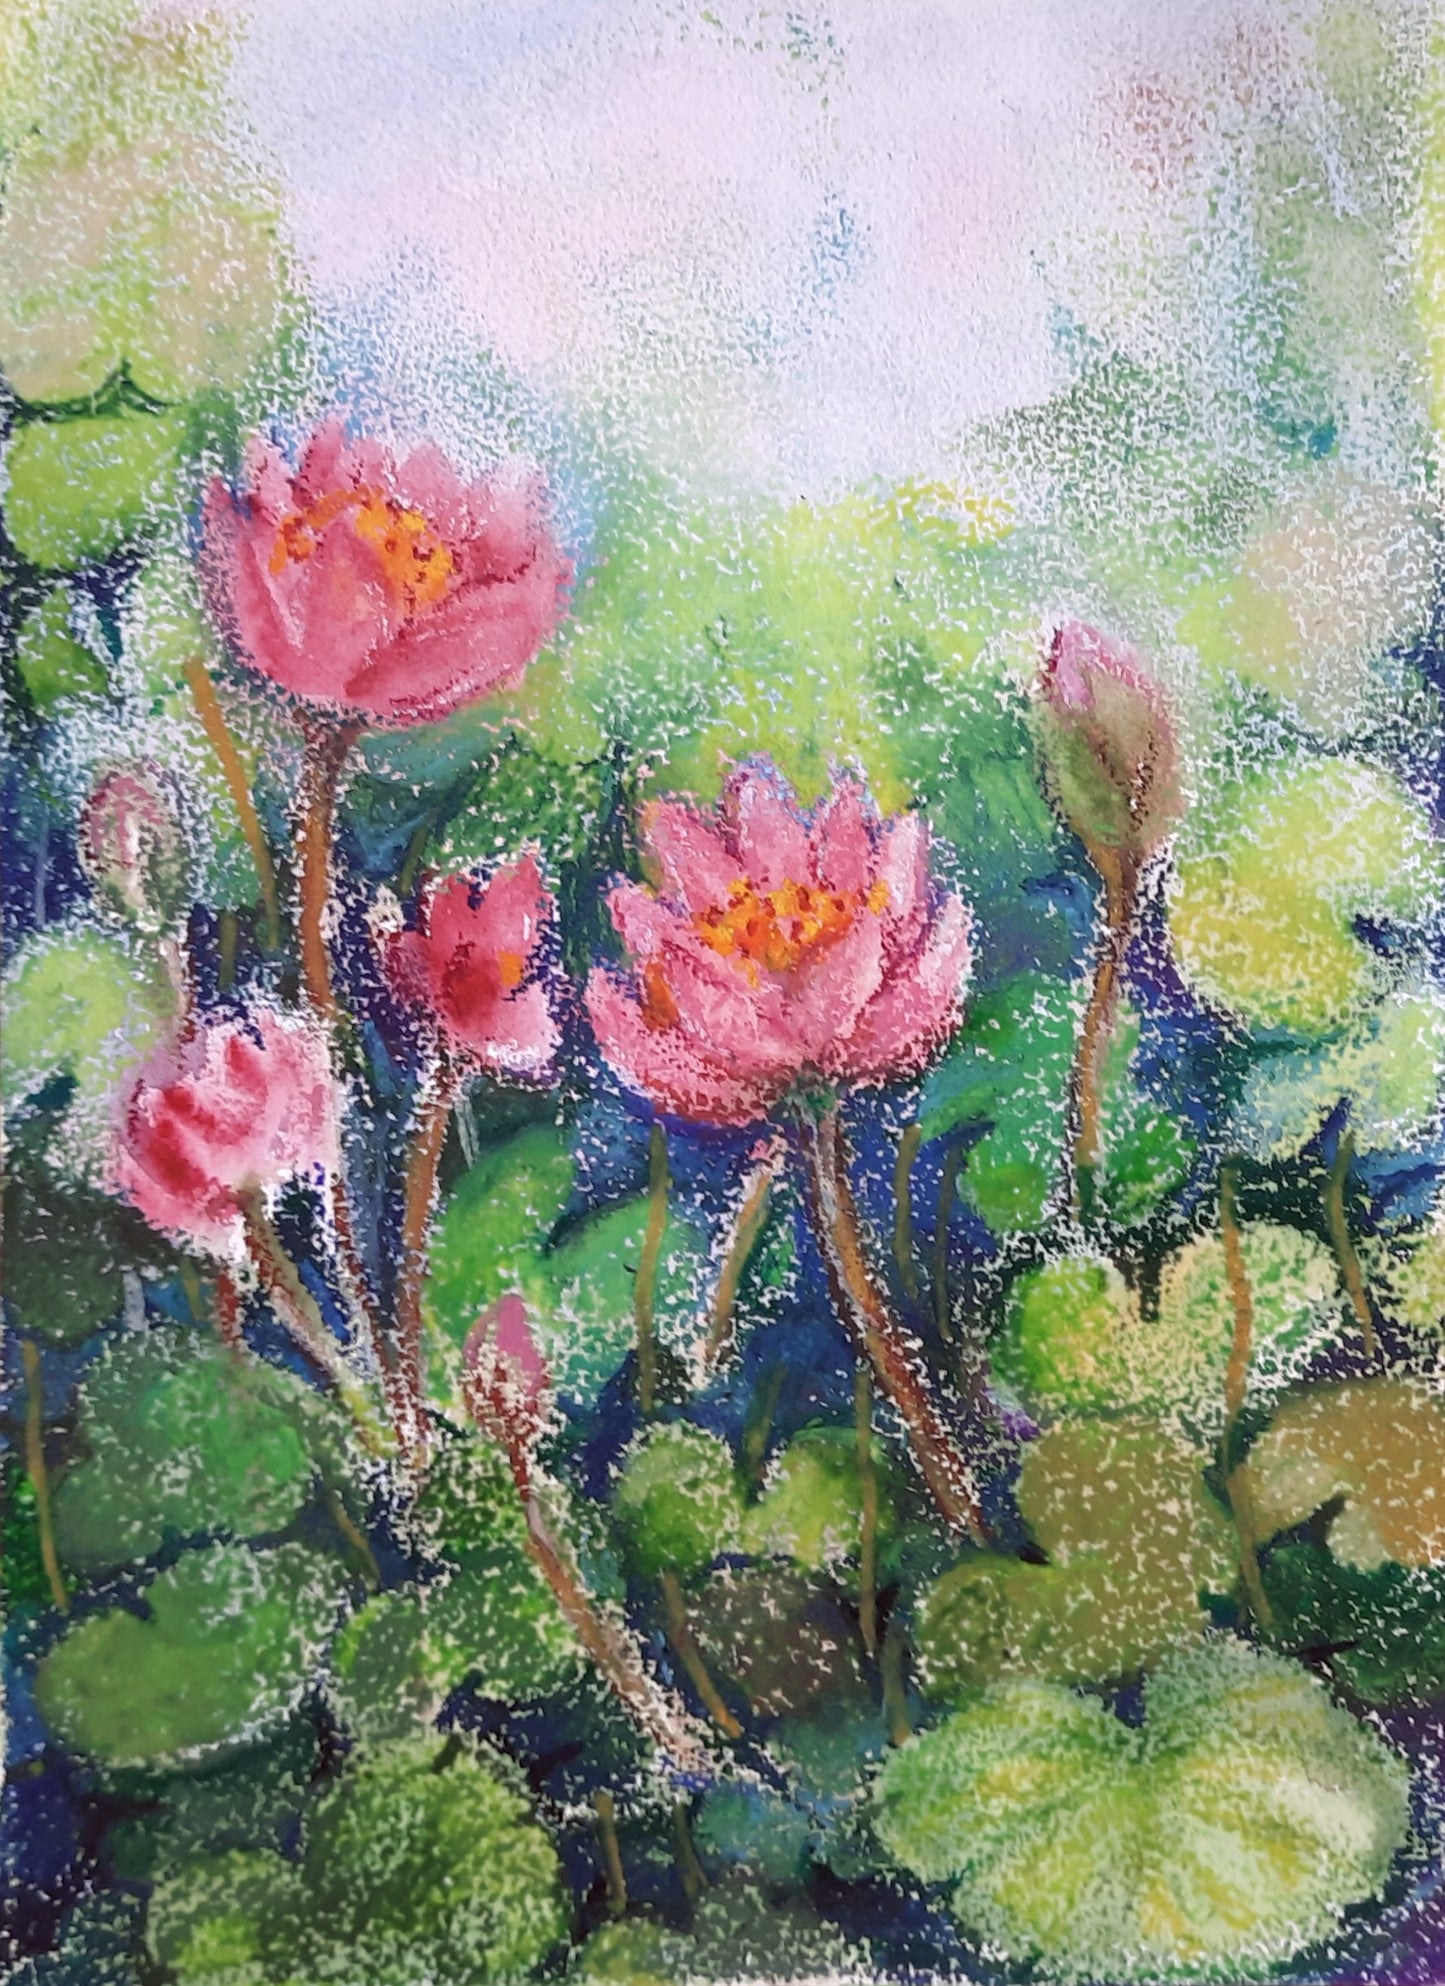 Lotus flowers in a Pond, mixed media artwork